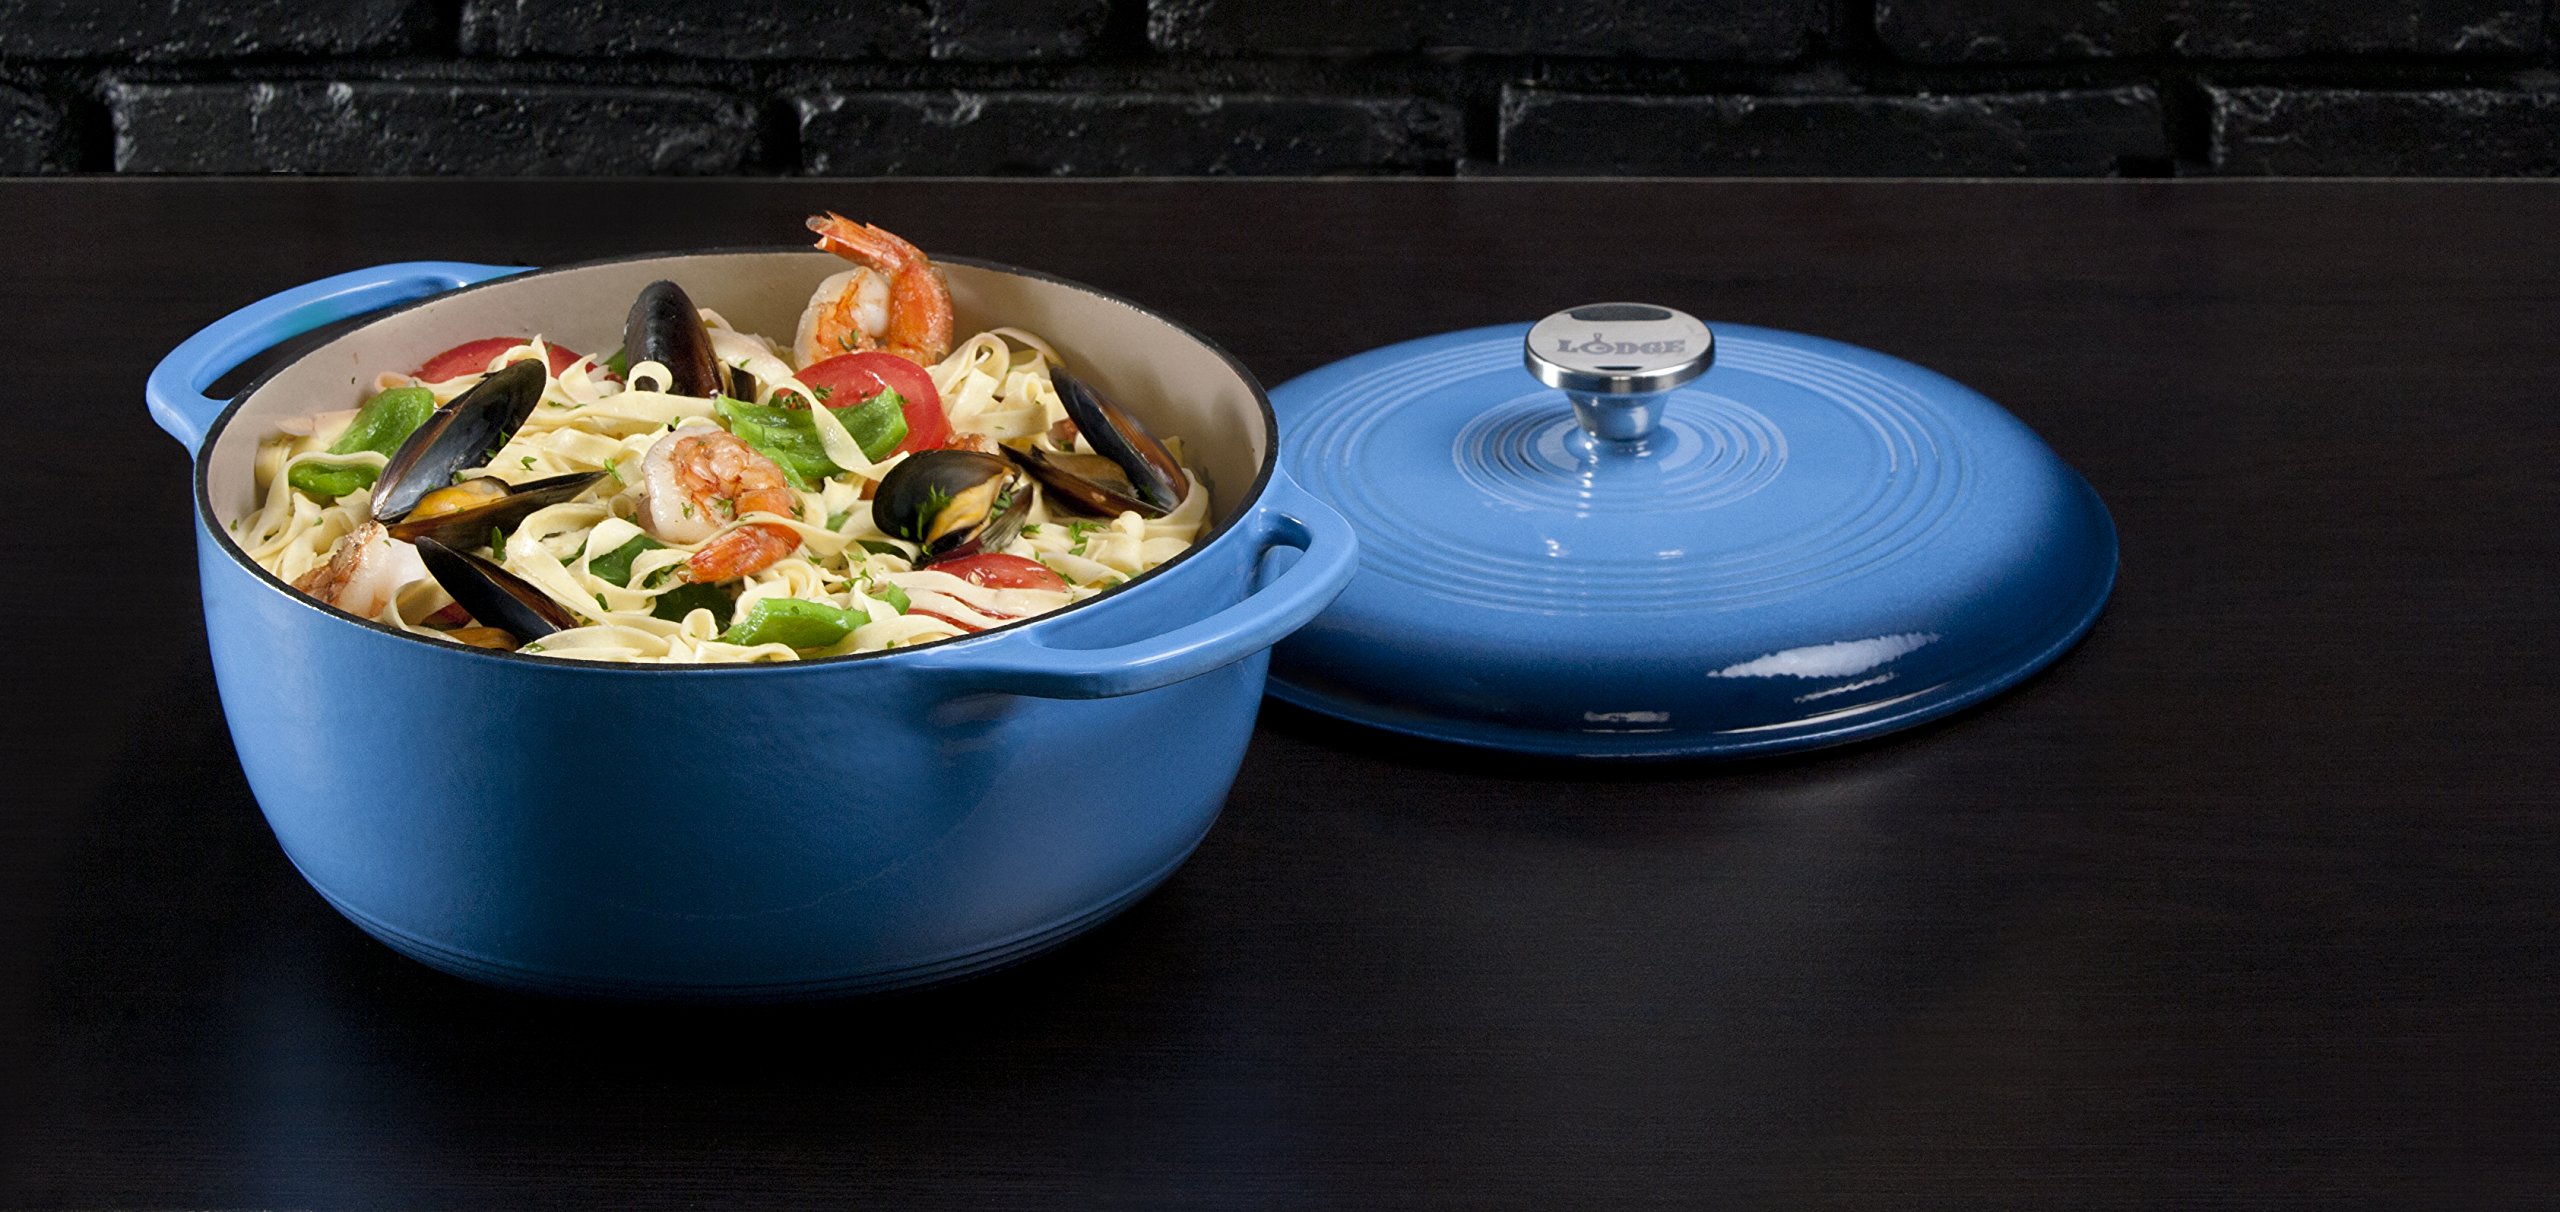 Lodge EC6D33 Enameled Cast Iron Dutch Oven, 6-Quart, Blue & Cast Iron Skillet with Red Silicone Hot Handle Holder, 12-inch